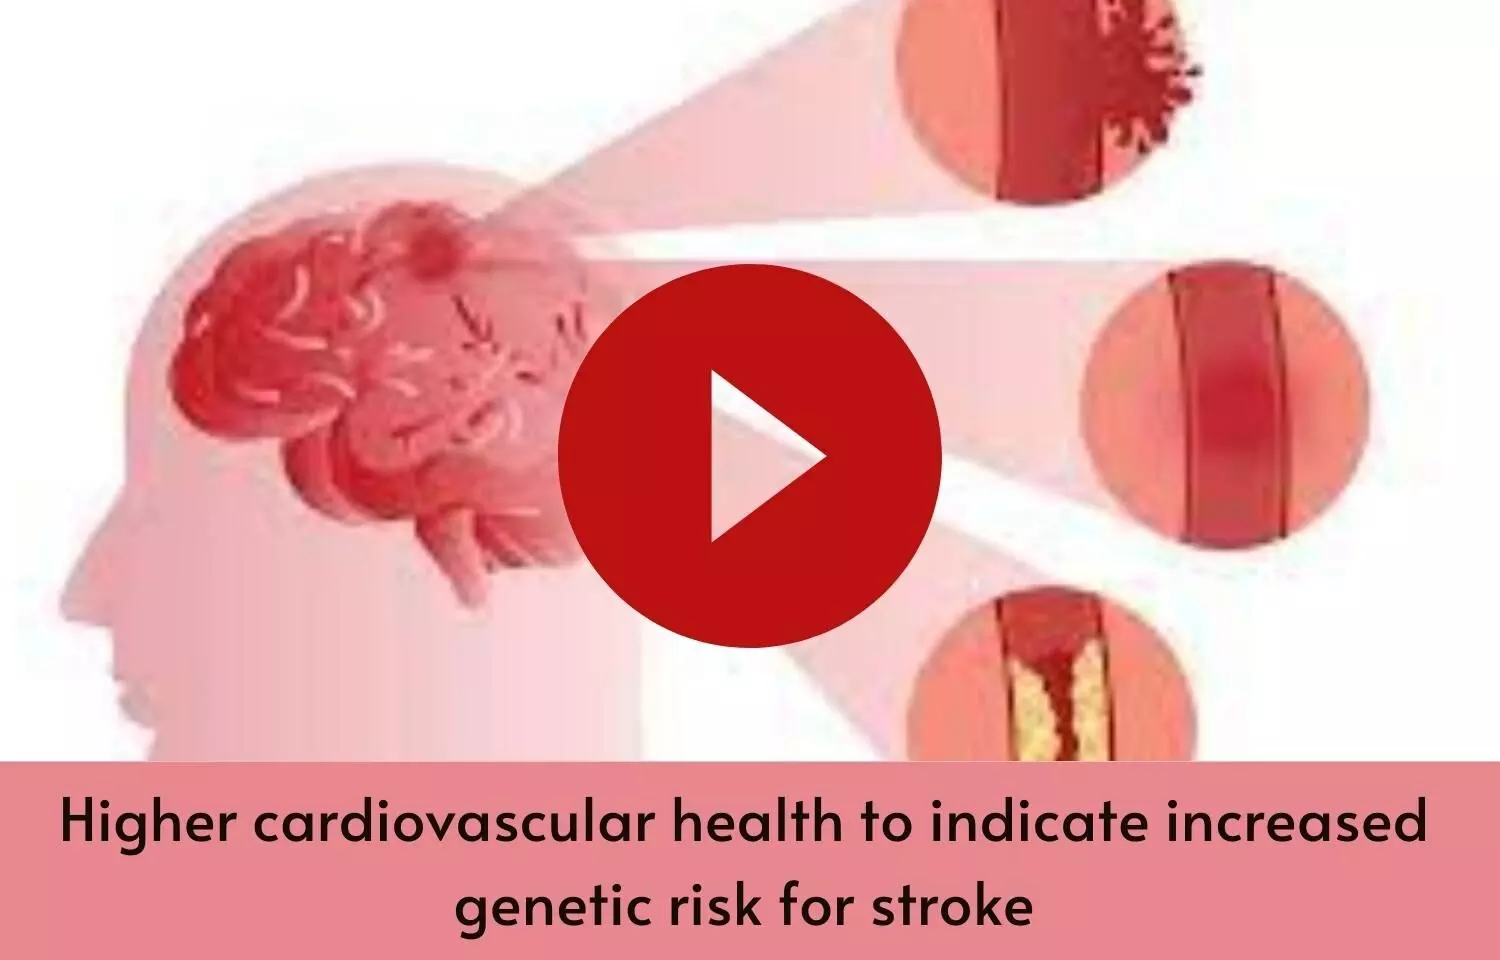 Higher cardiovascular health to indicate increased genetic risk for stroke